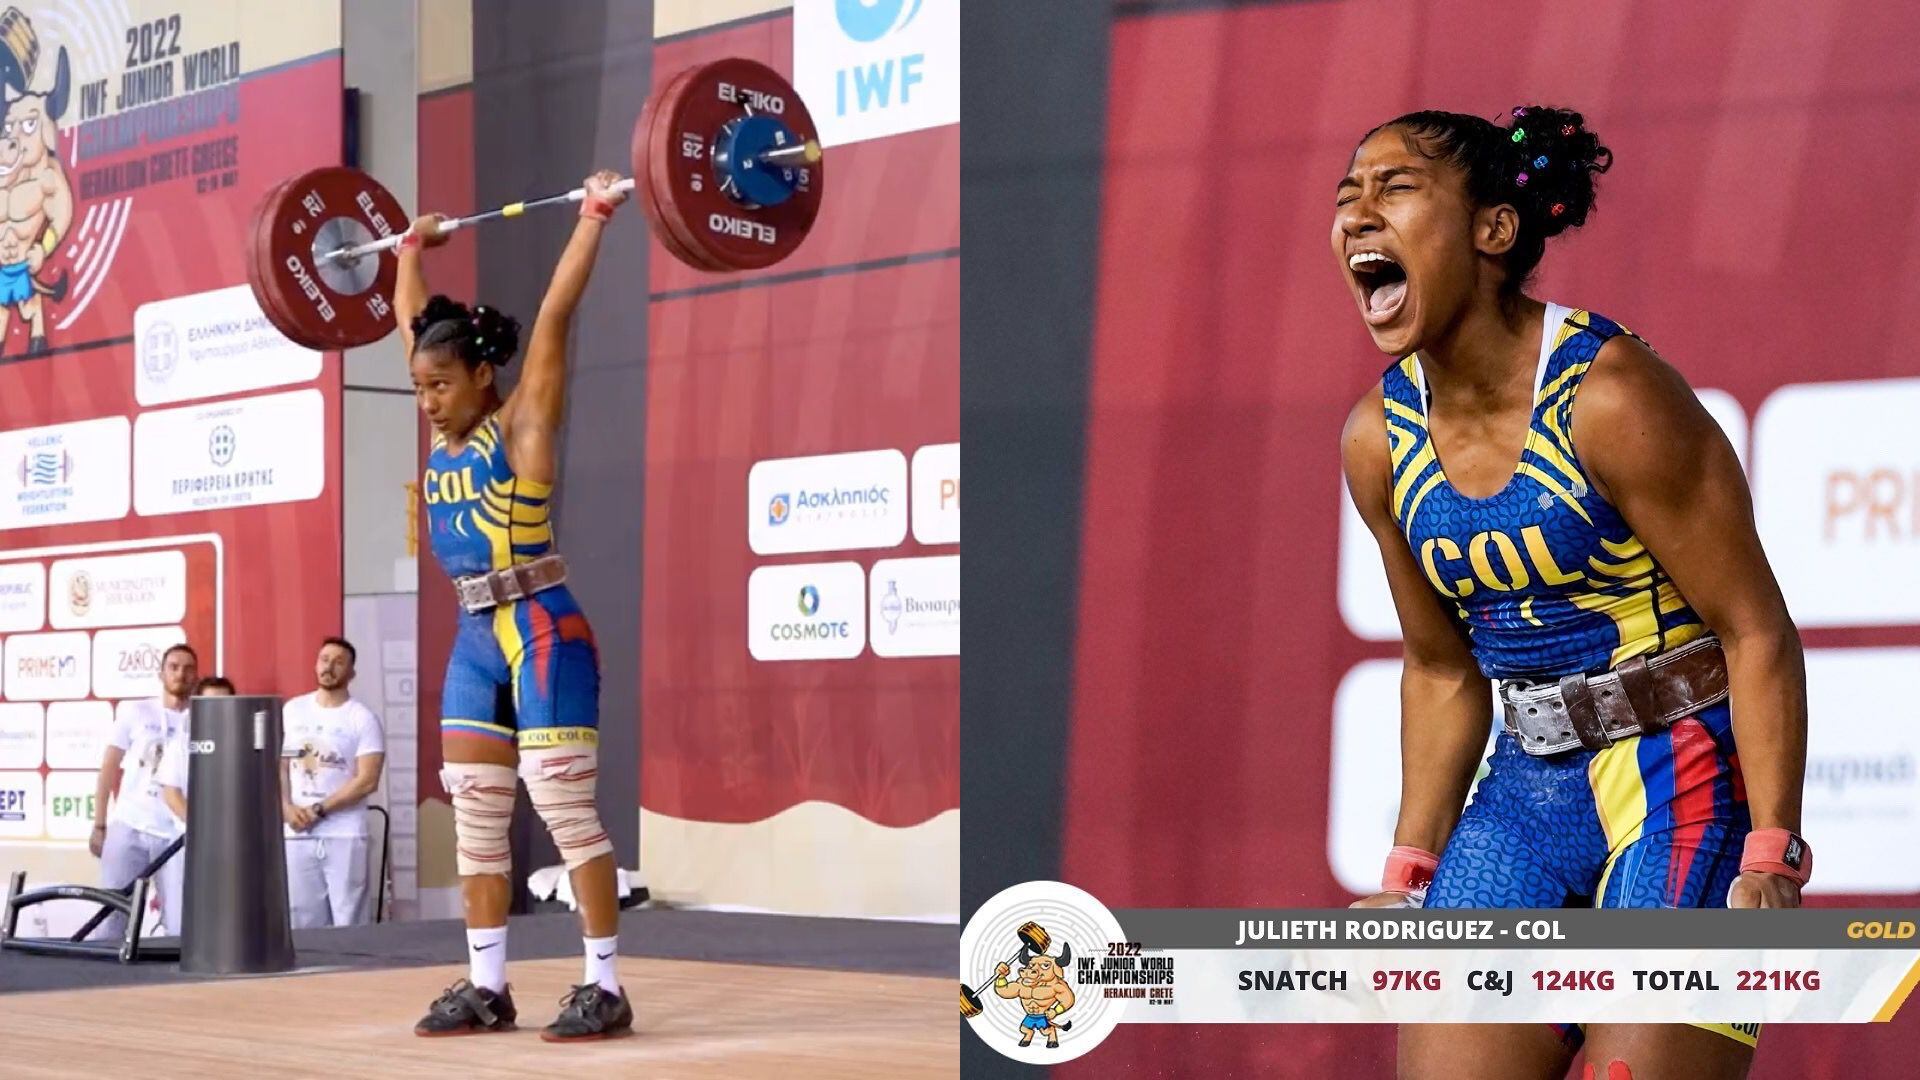 Future Olympic weightlifters are in the spotlight at the World  Championships in León, Mexico - Infobae